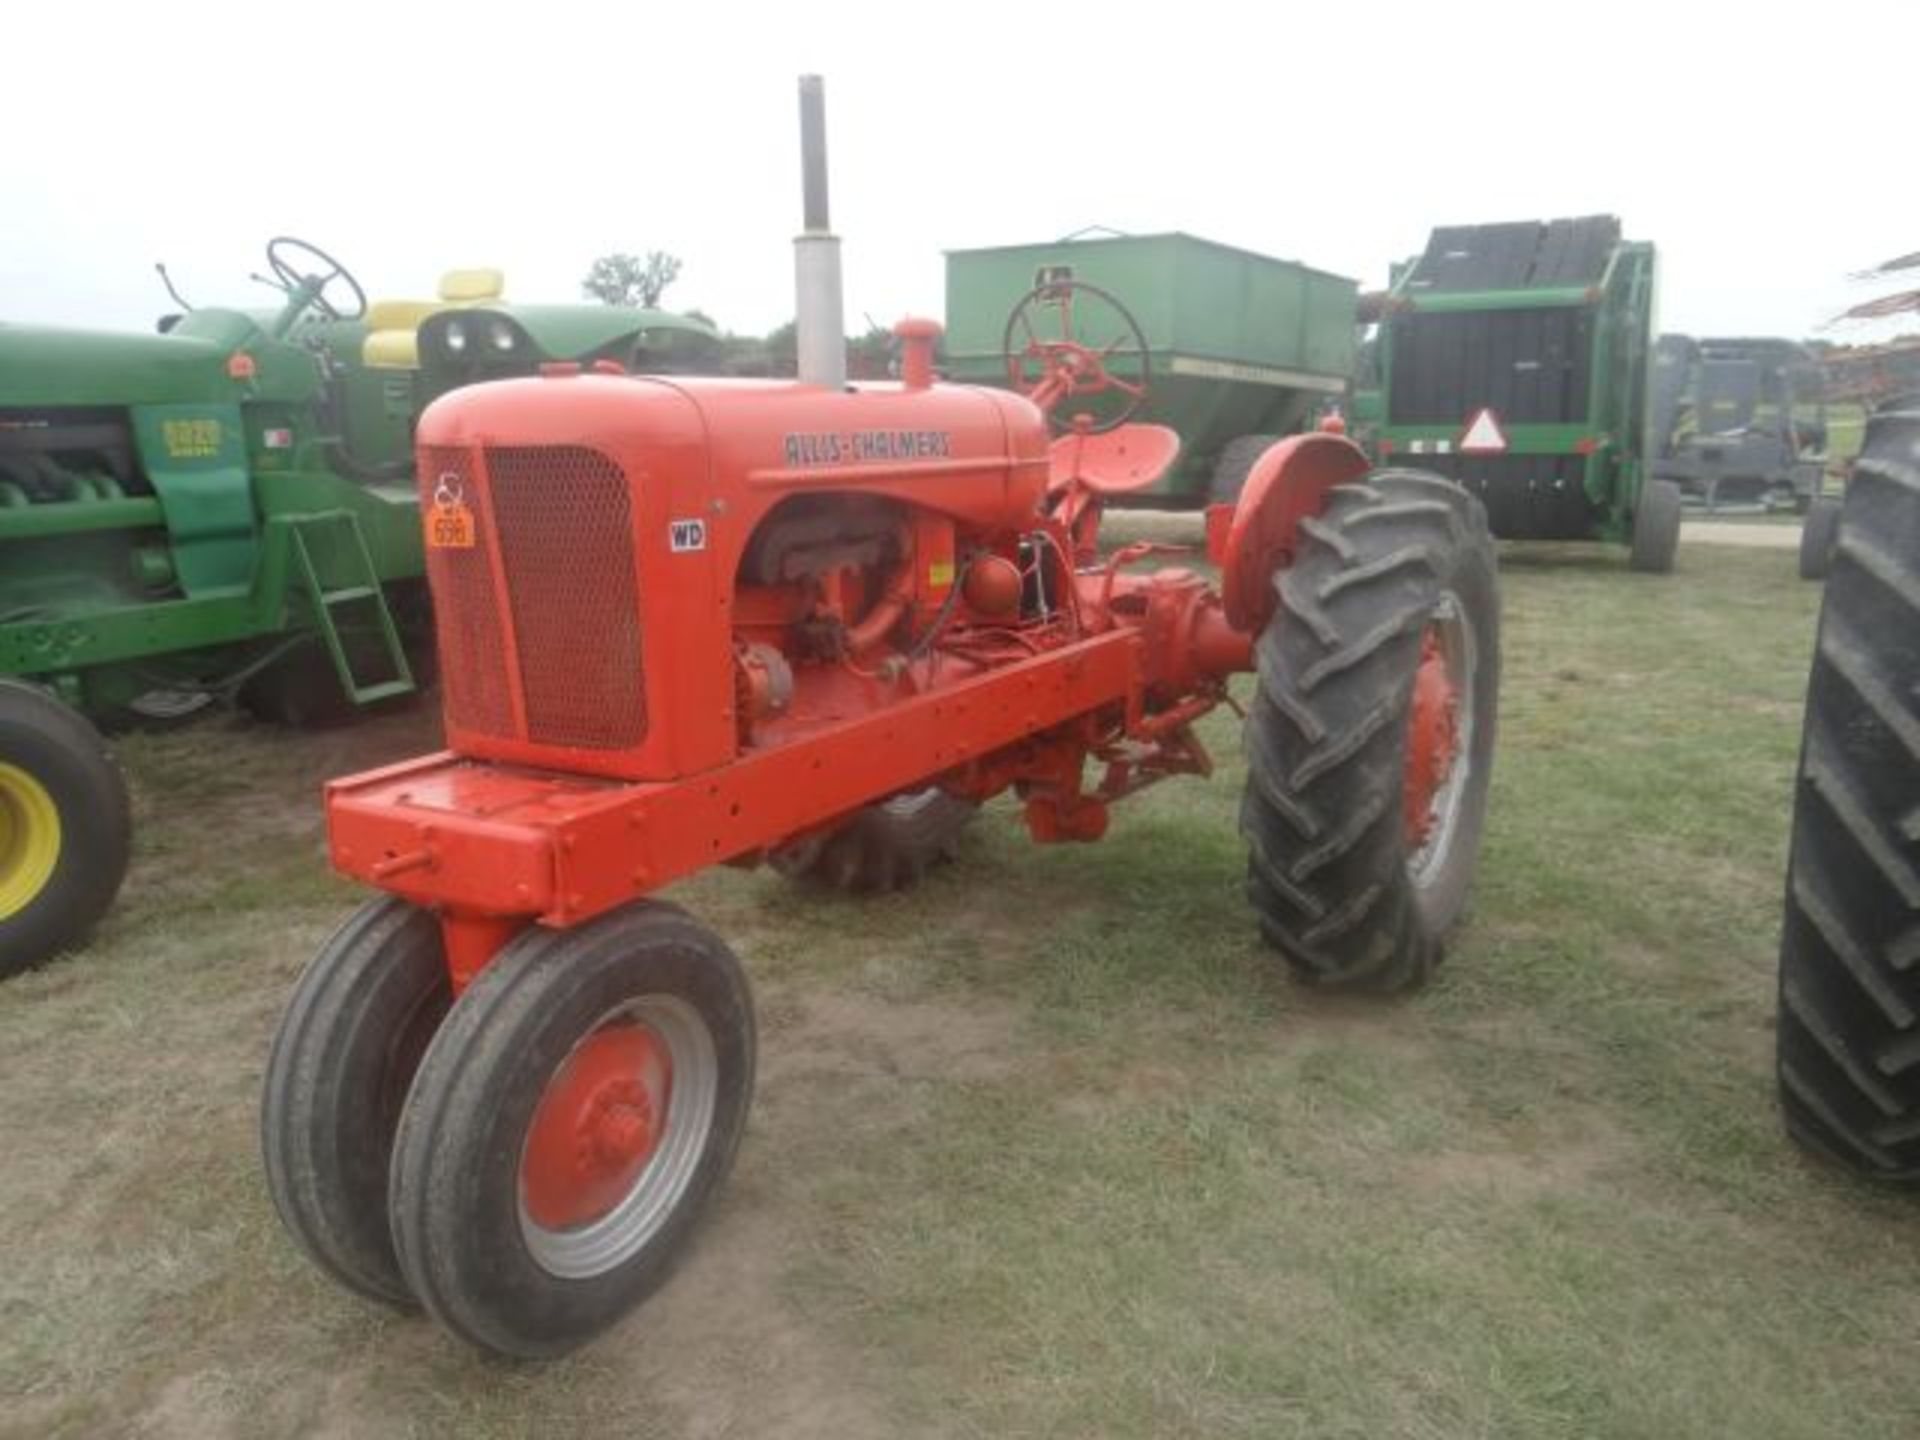 AC WD Tractor Newer Paint, Good Clutch, Good Tires